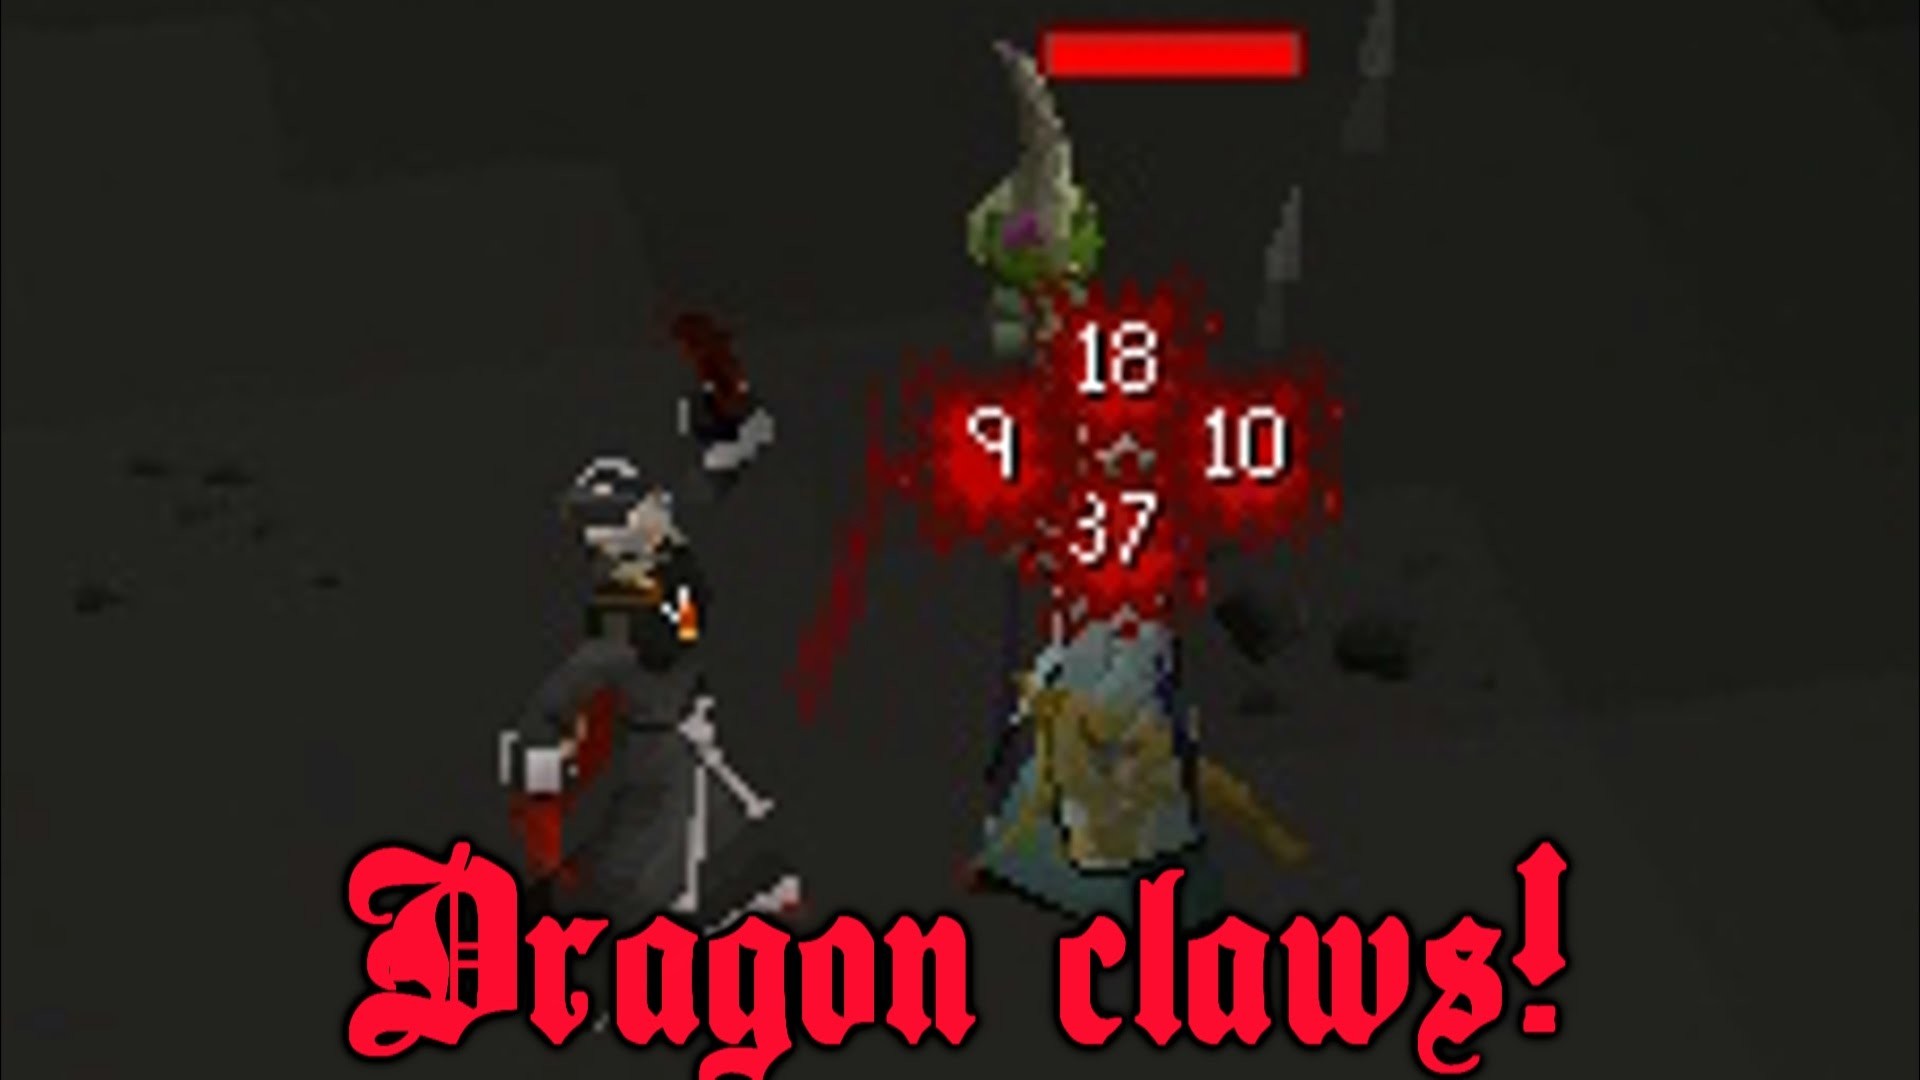 1920x1080 DRAGON CLAWS RUSHING PKING OLDSCHOOL RUNESCAPE PK (OSRS 2007) - YouTube